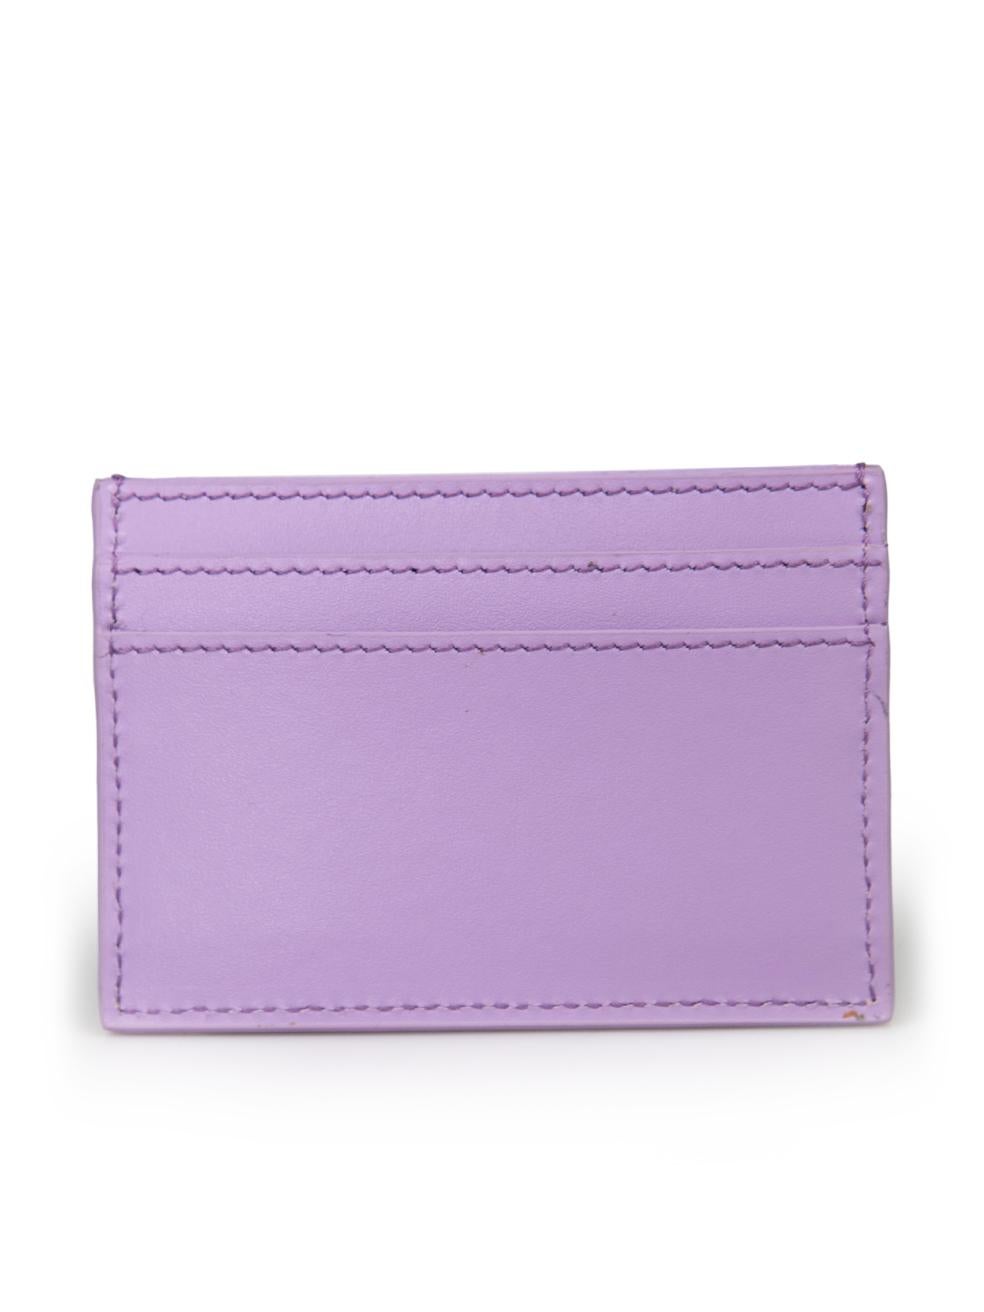 Versace Baby Violet Leather Greca Goddess Card Holder In New Condition For Sale In London, GB